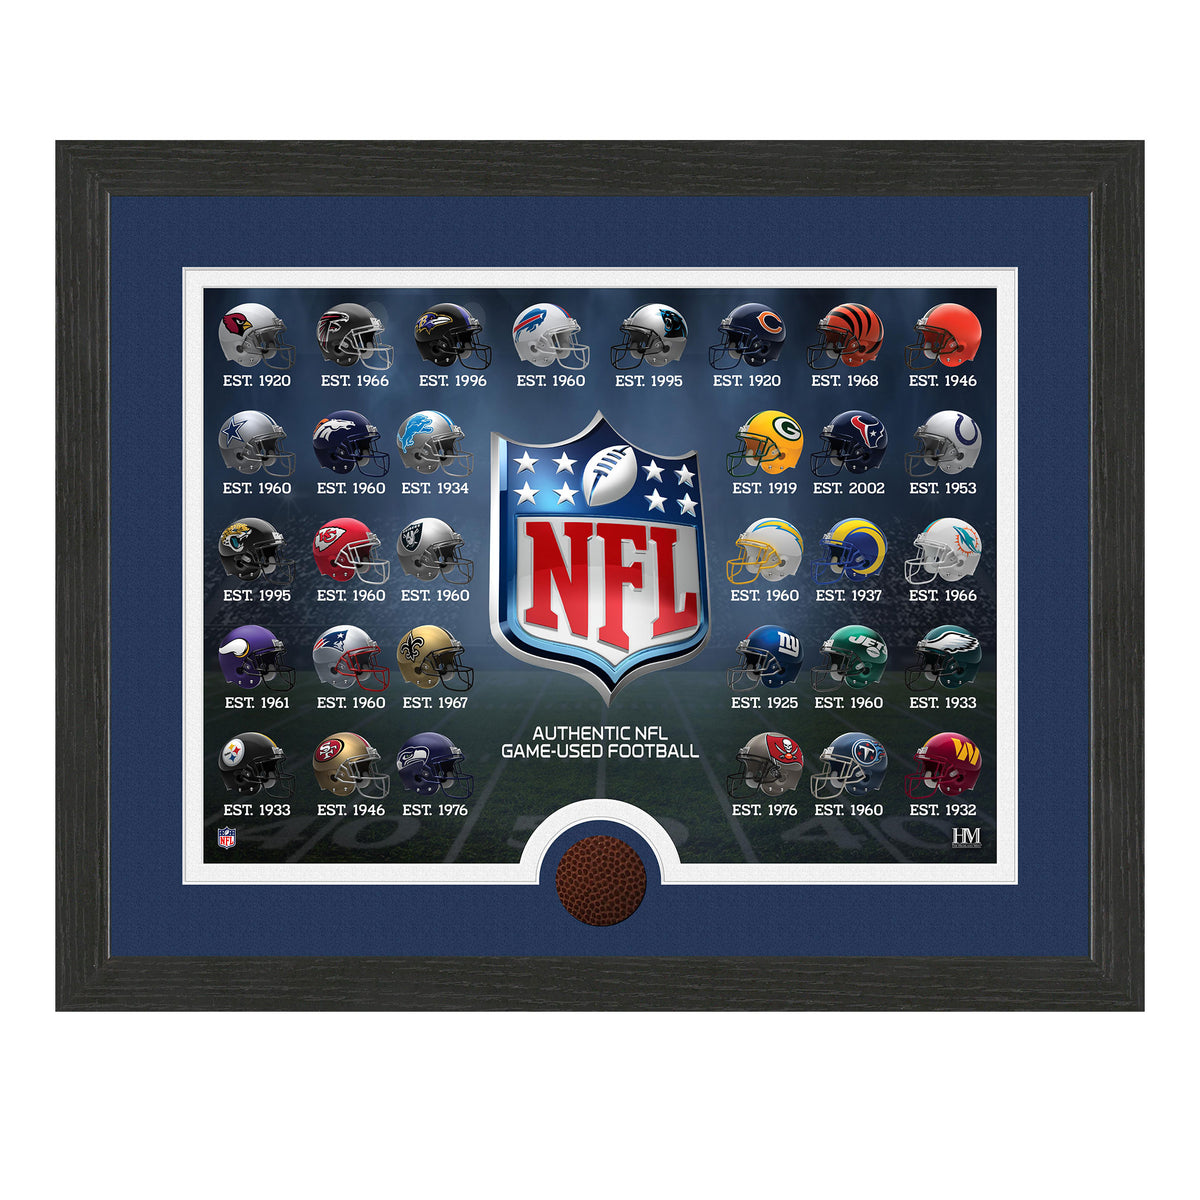 NFL Game-Used Football and Helmet Collection in Framed Photo